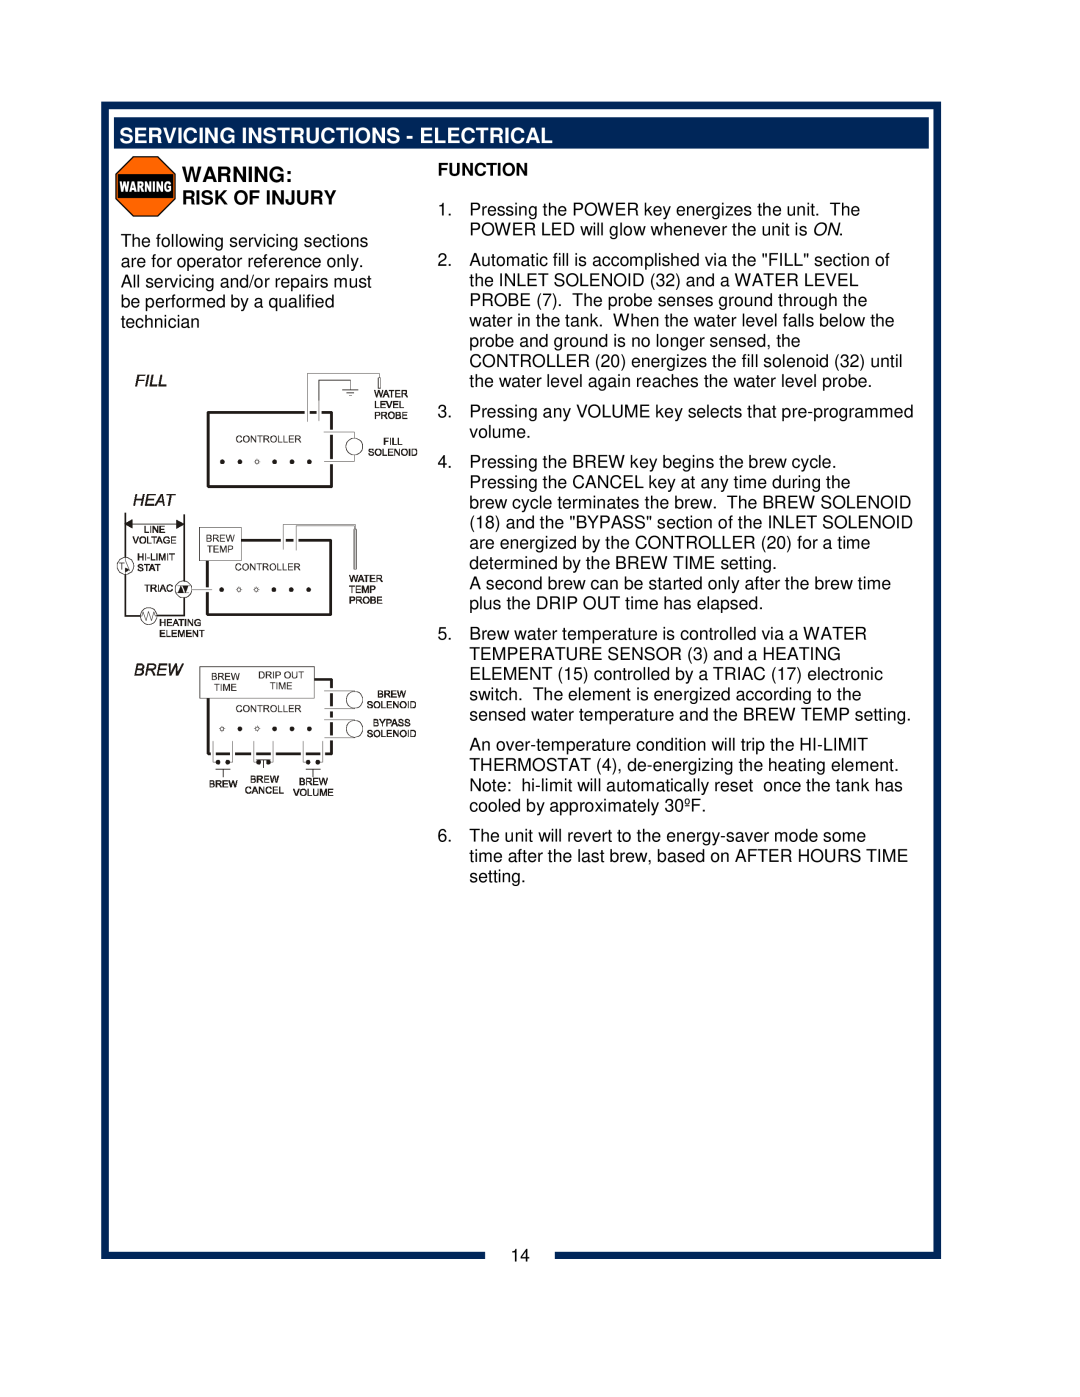 Bloomfield 2030 owner manual Servicing Instructions - Electrical, Risk Of Injury 